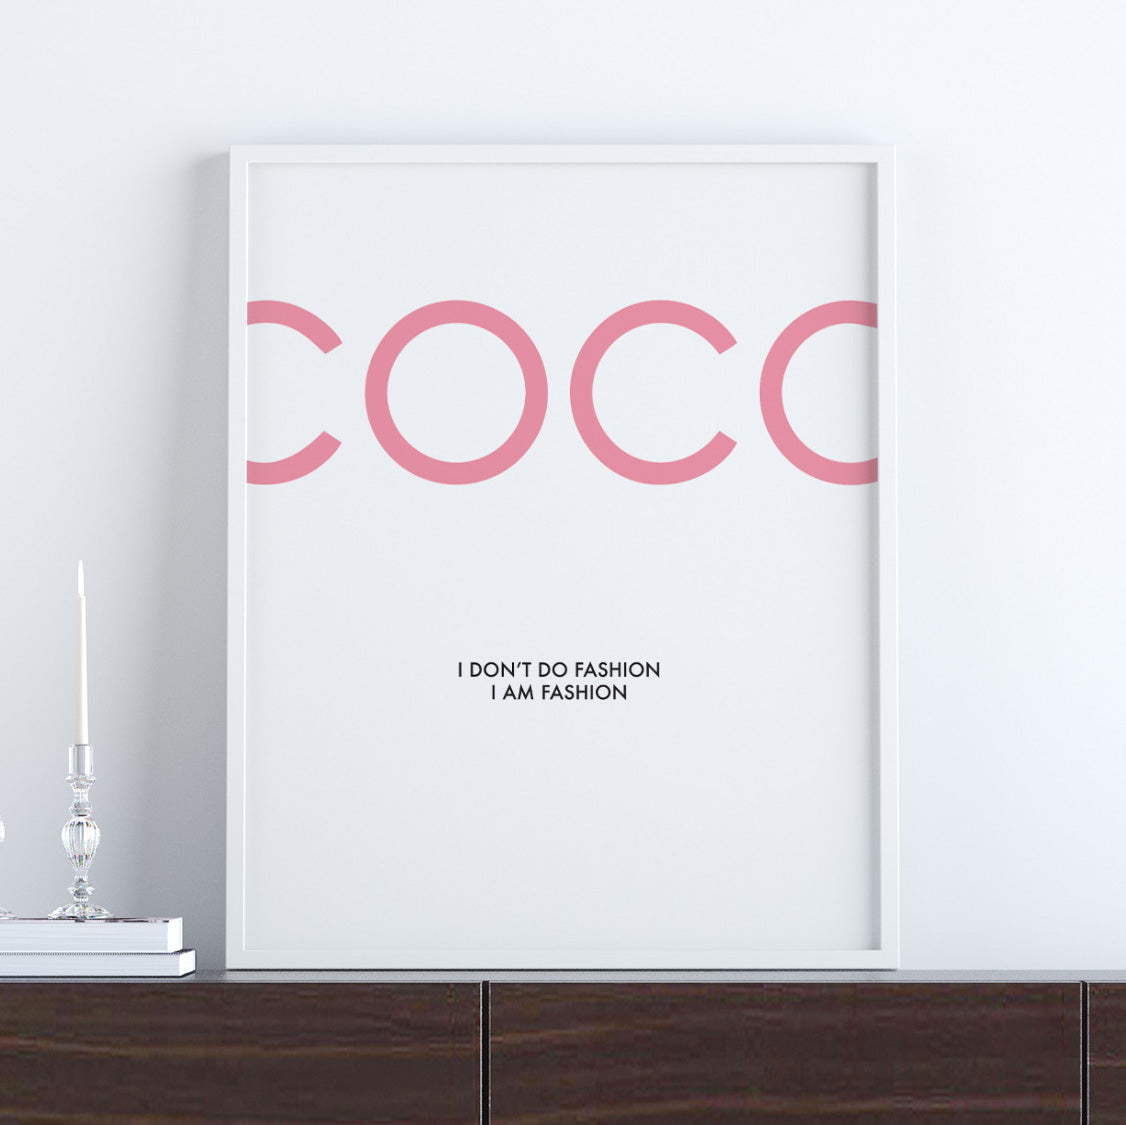 coco chanel frame